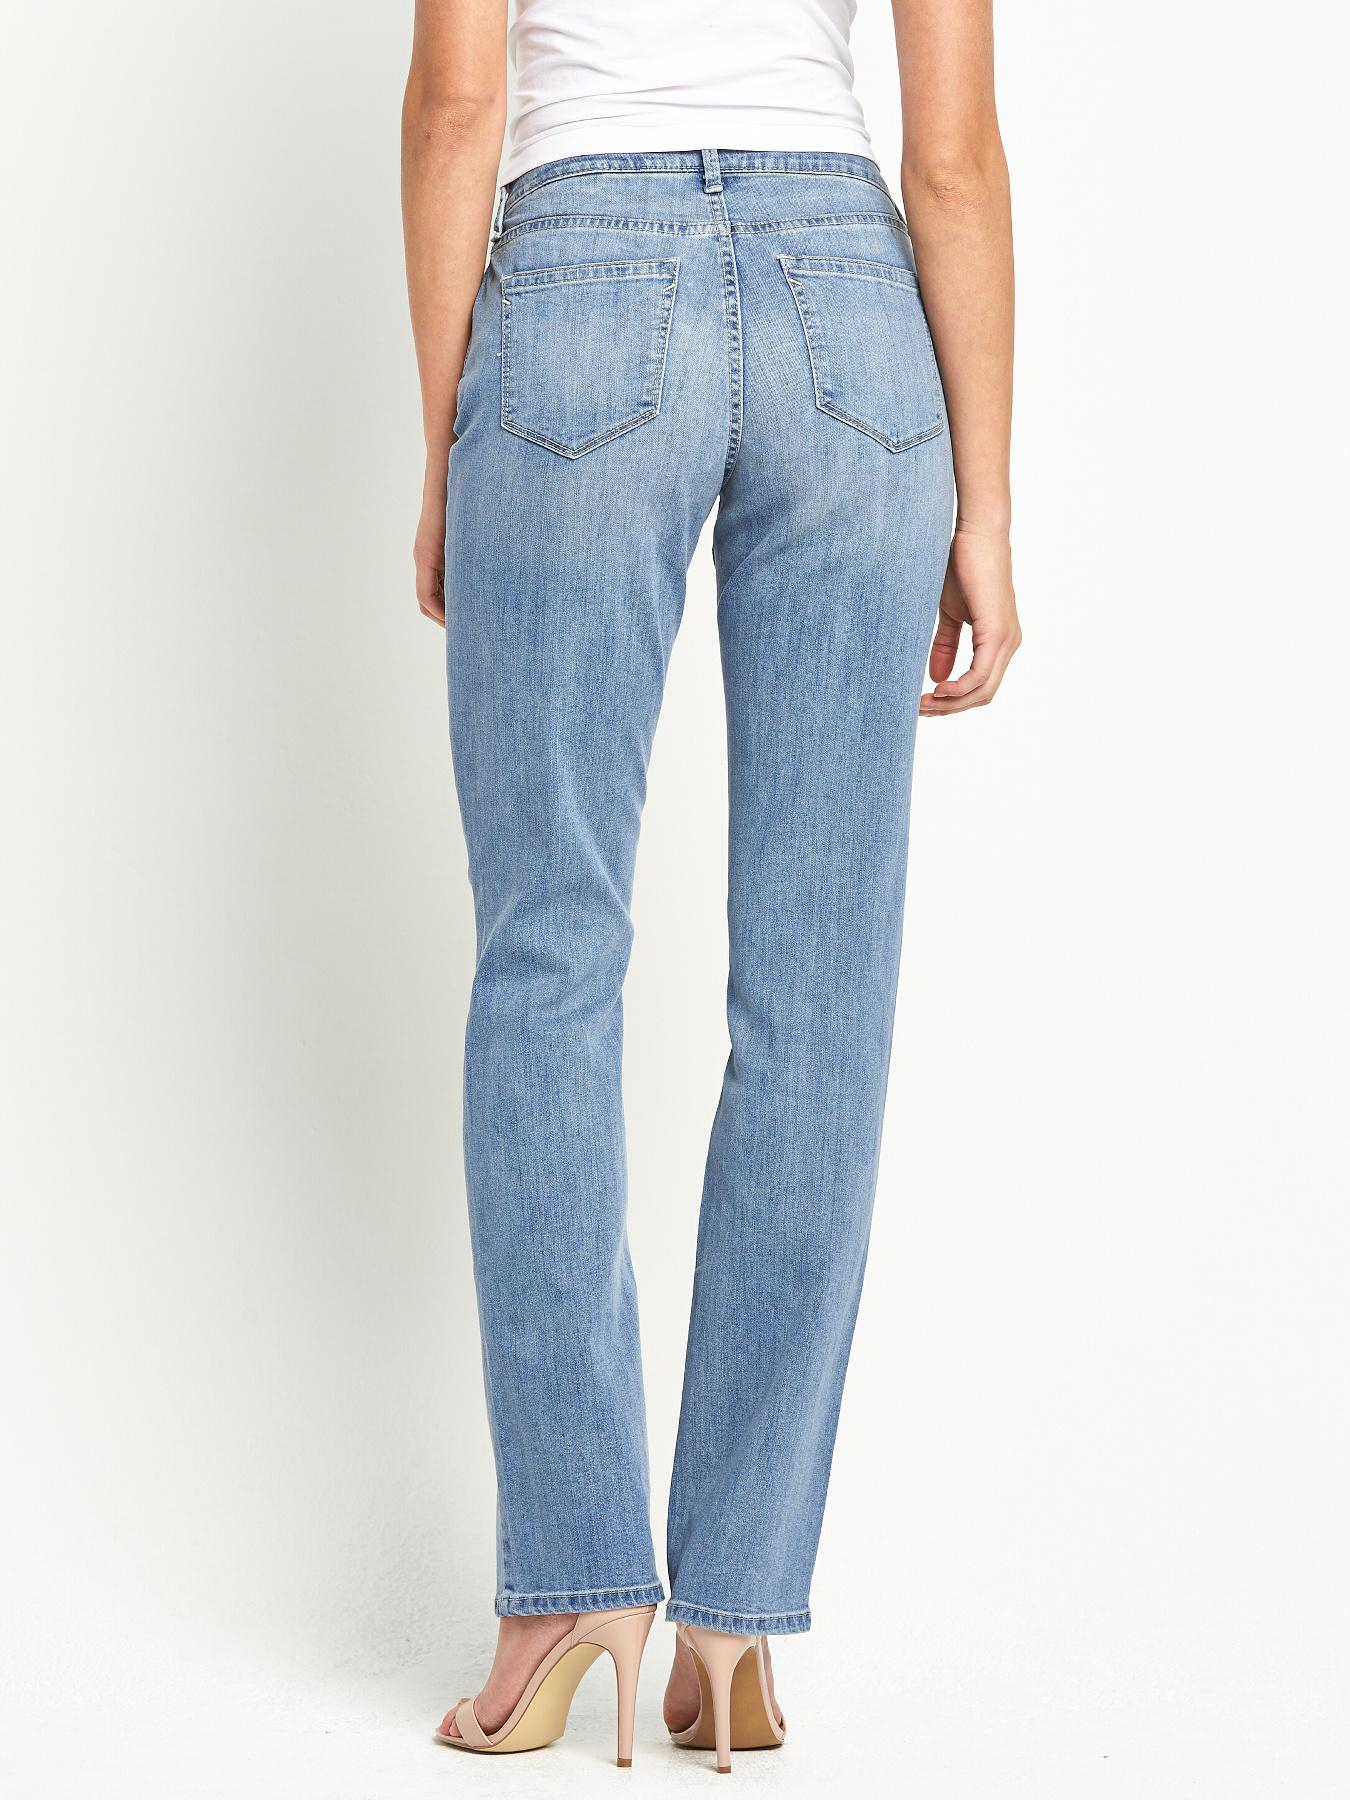 Nydj High Waisted Light Wash Straight Slimming Jeans in Blue